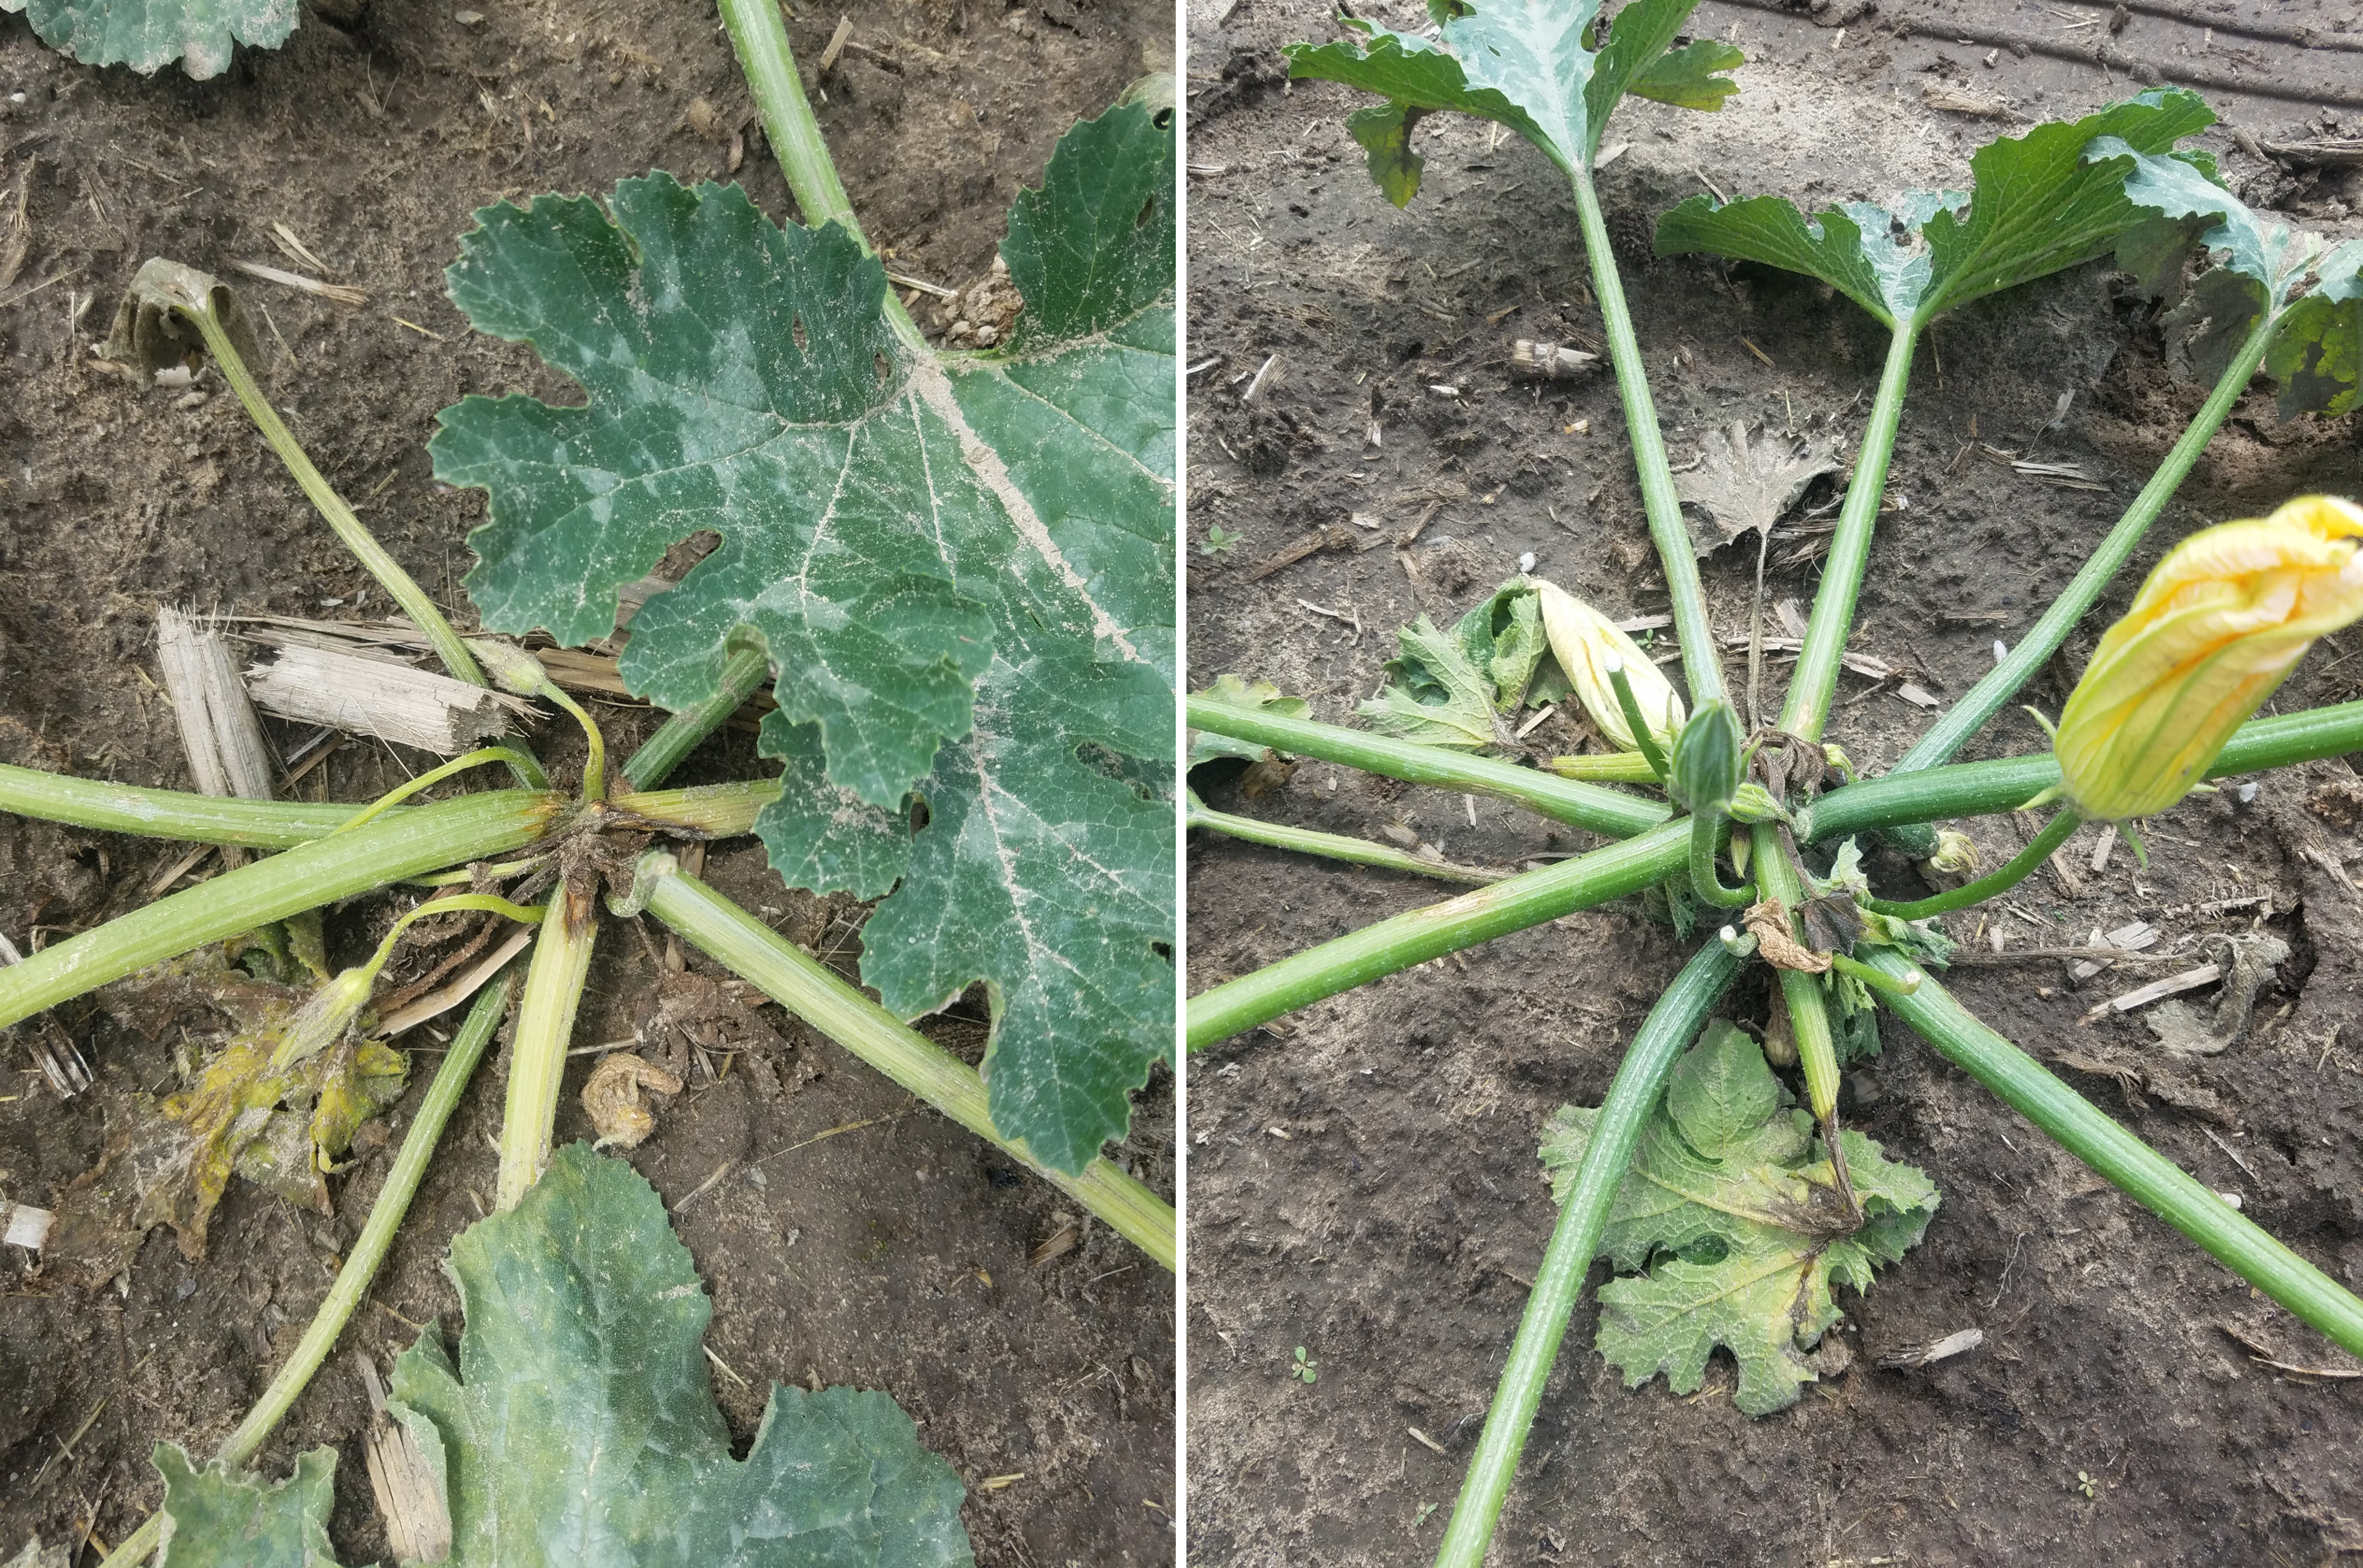 Two zucchini plants wilted.